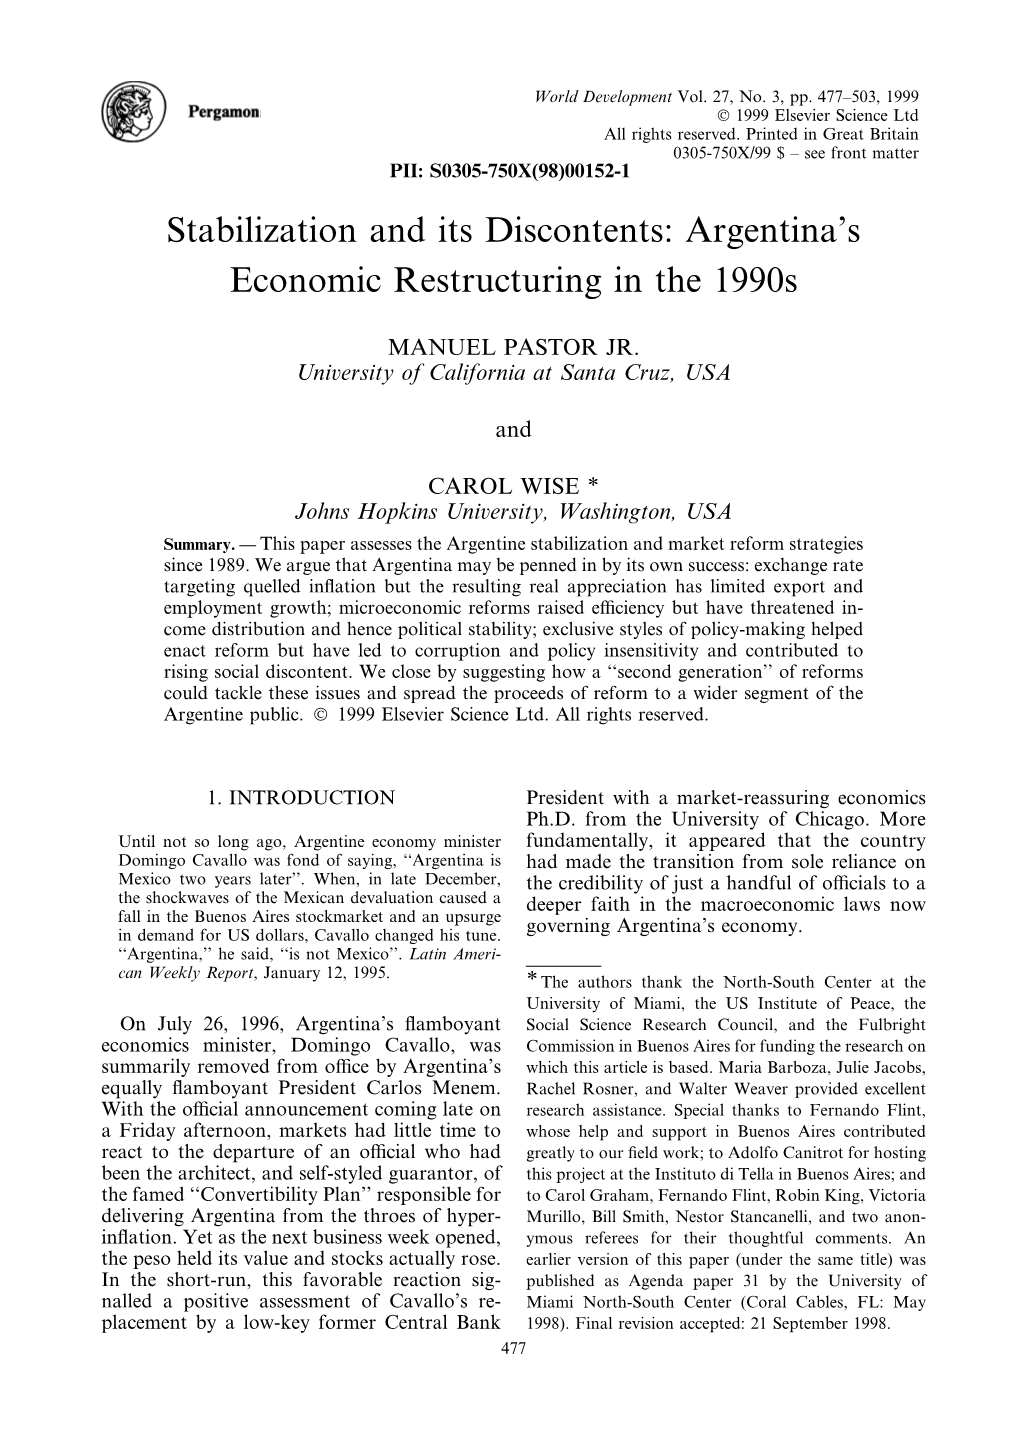 Stabilization and Its Discontents: Argentina's Economic Restructuring in the 1990S